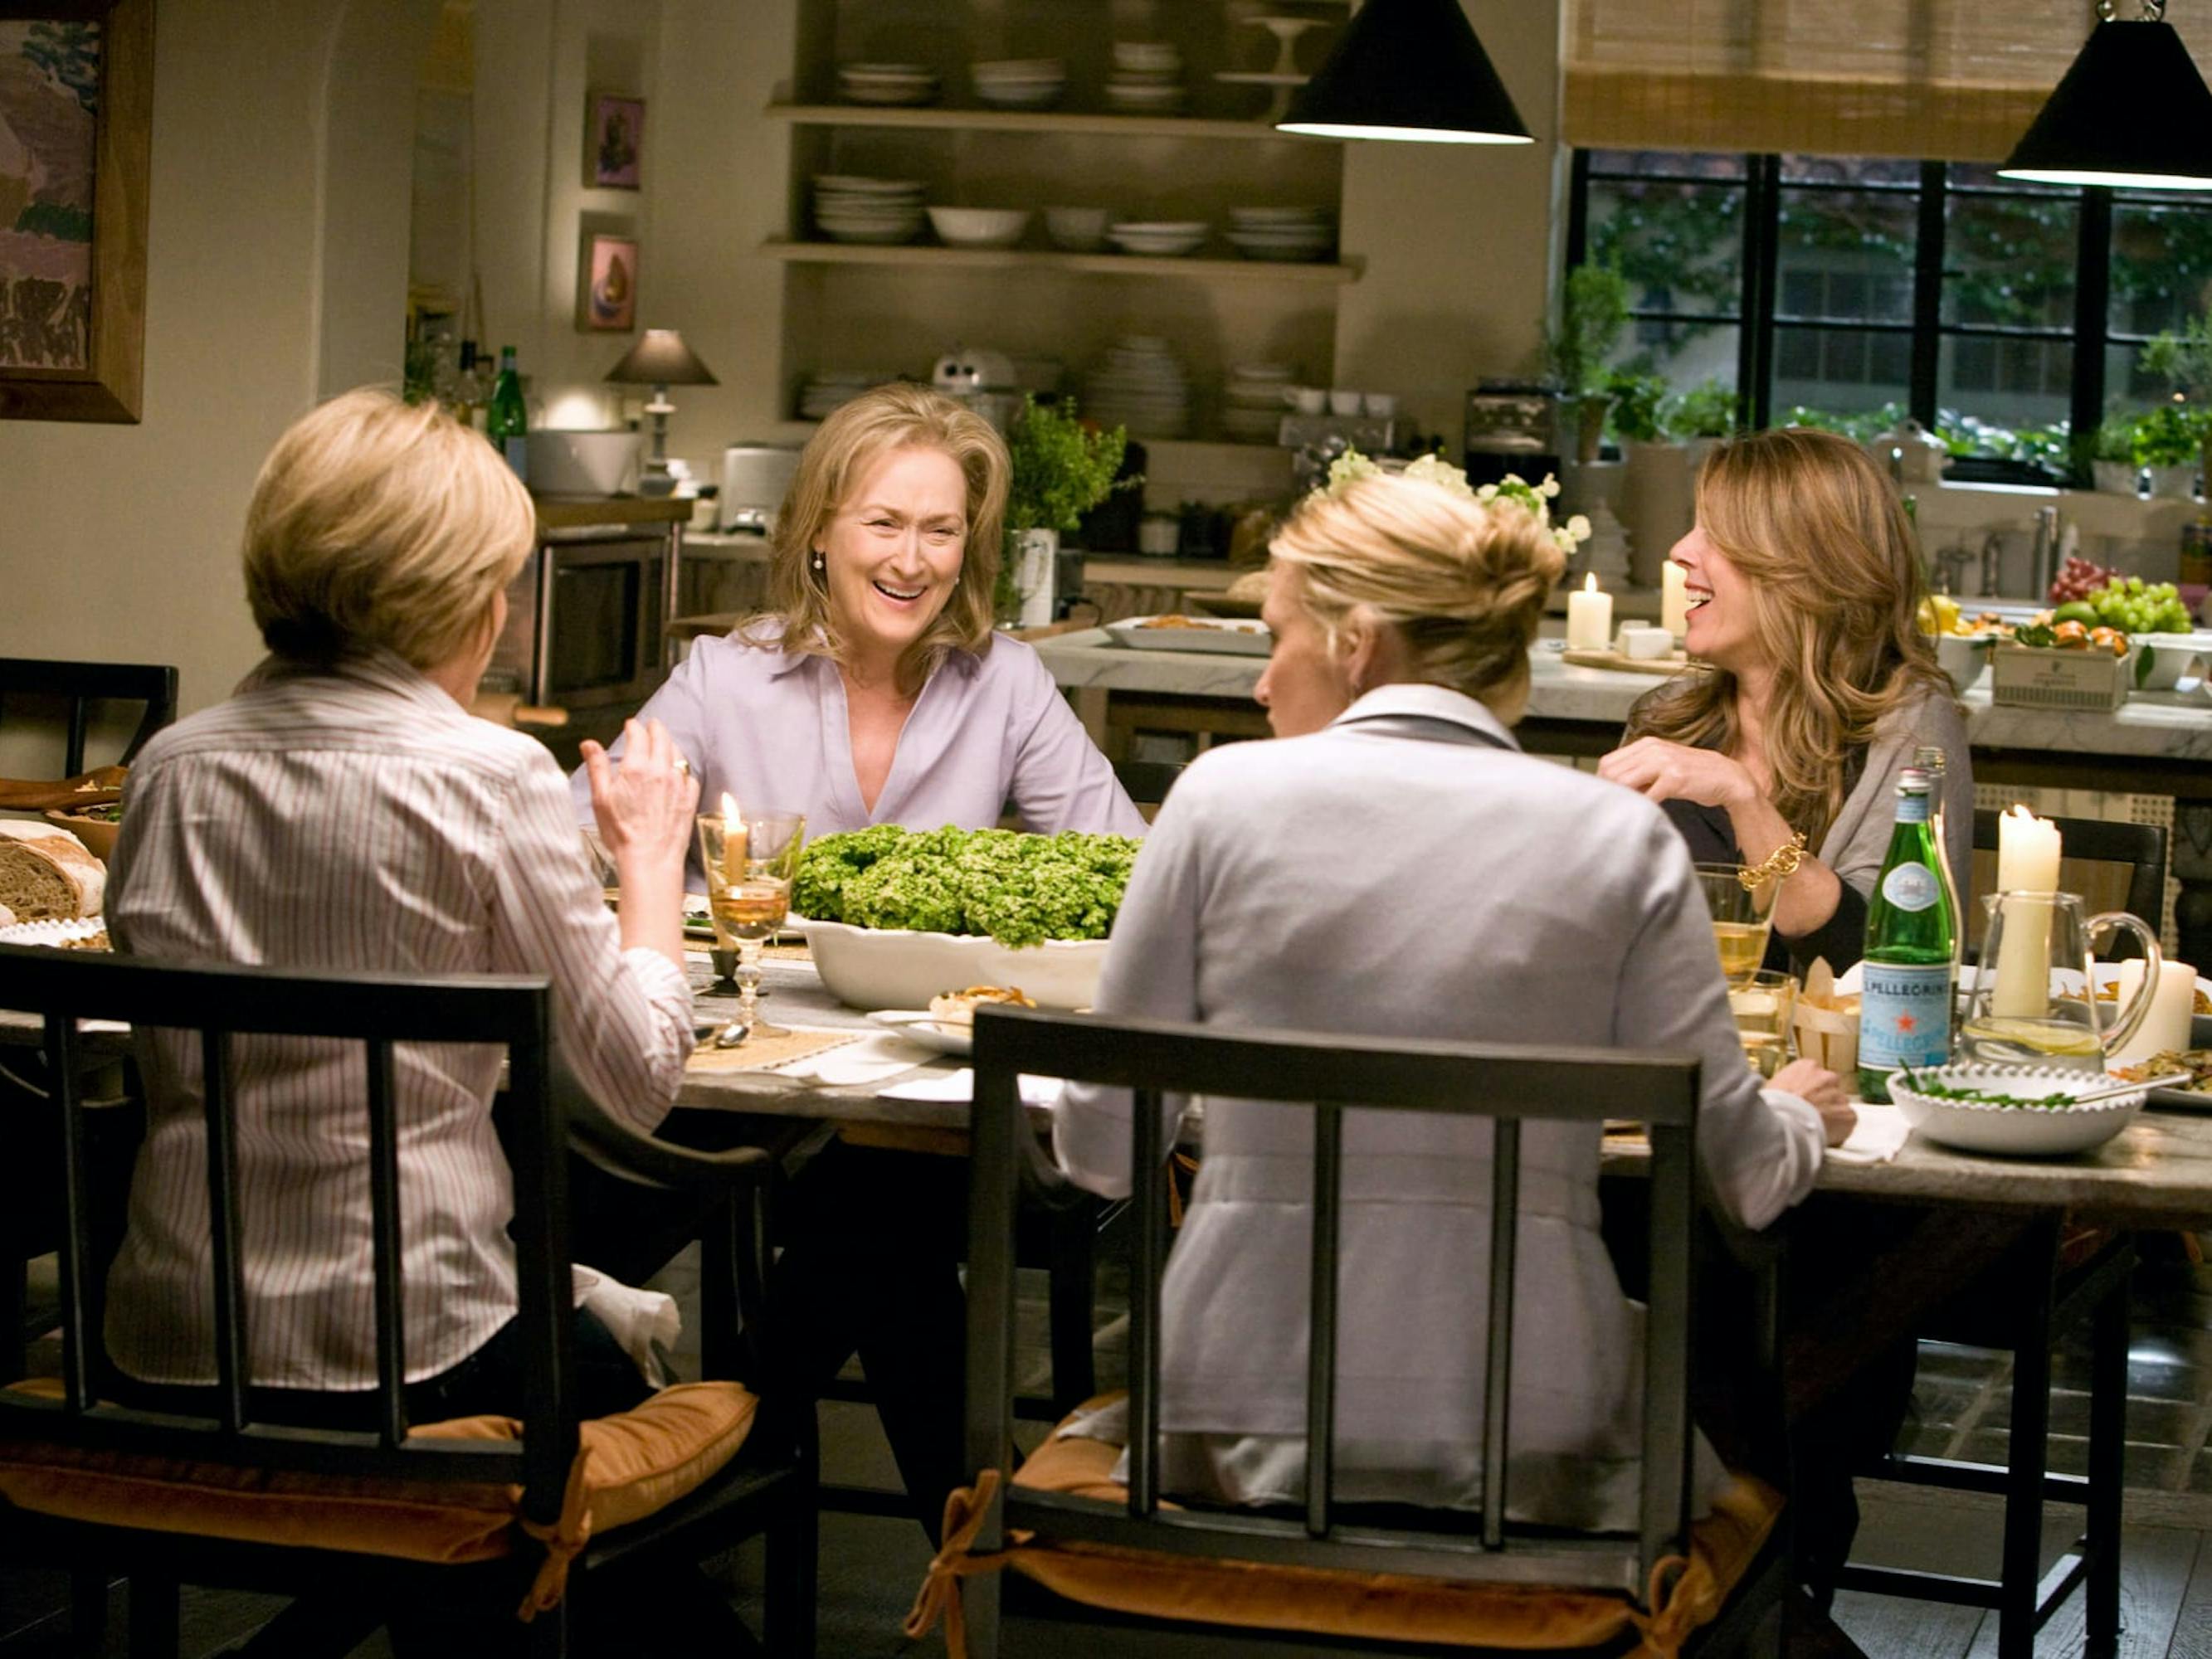 Joanne (Mary Kay Place), Jane Adler (Meryl Streep), Trisha (Rita Wilson), and Diane (Alexandra Wentworth) in It’s Complicated sit around a dinner table laughing and talking.